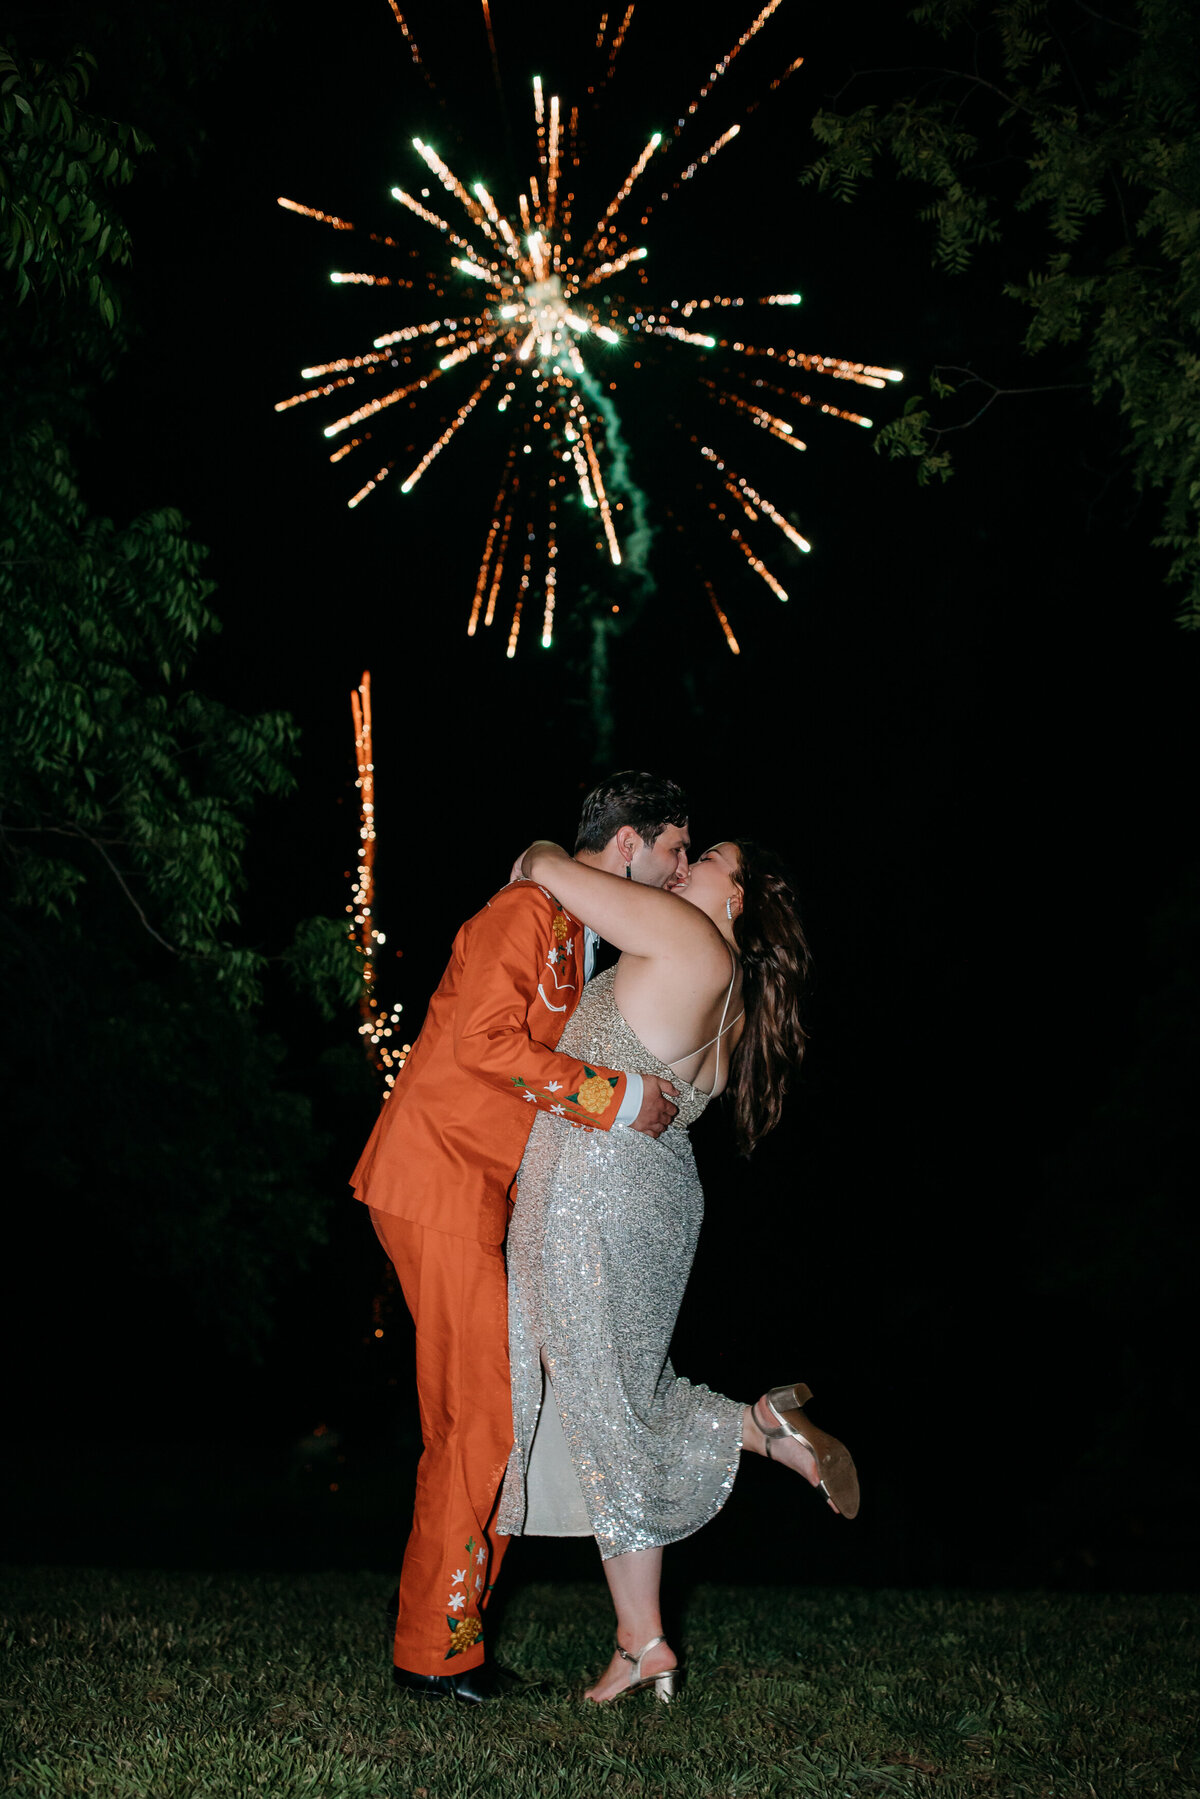 Couple kissing in a nighttime celebration with fireworks bursting in the sky above